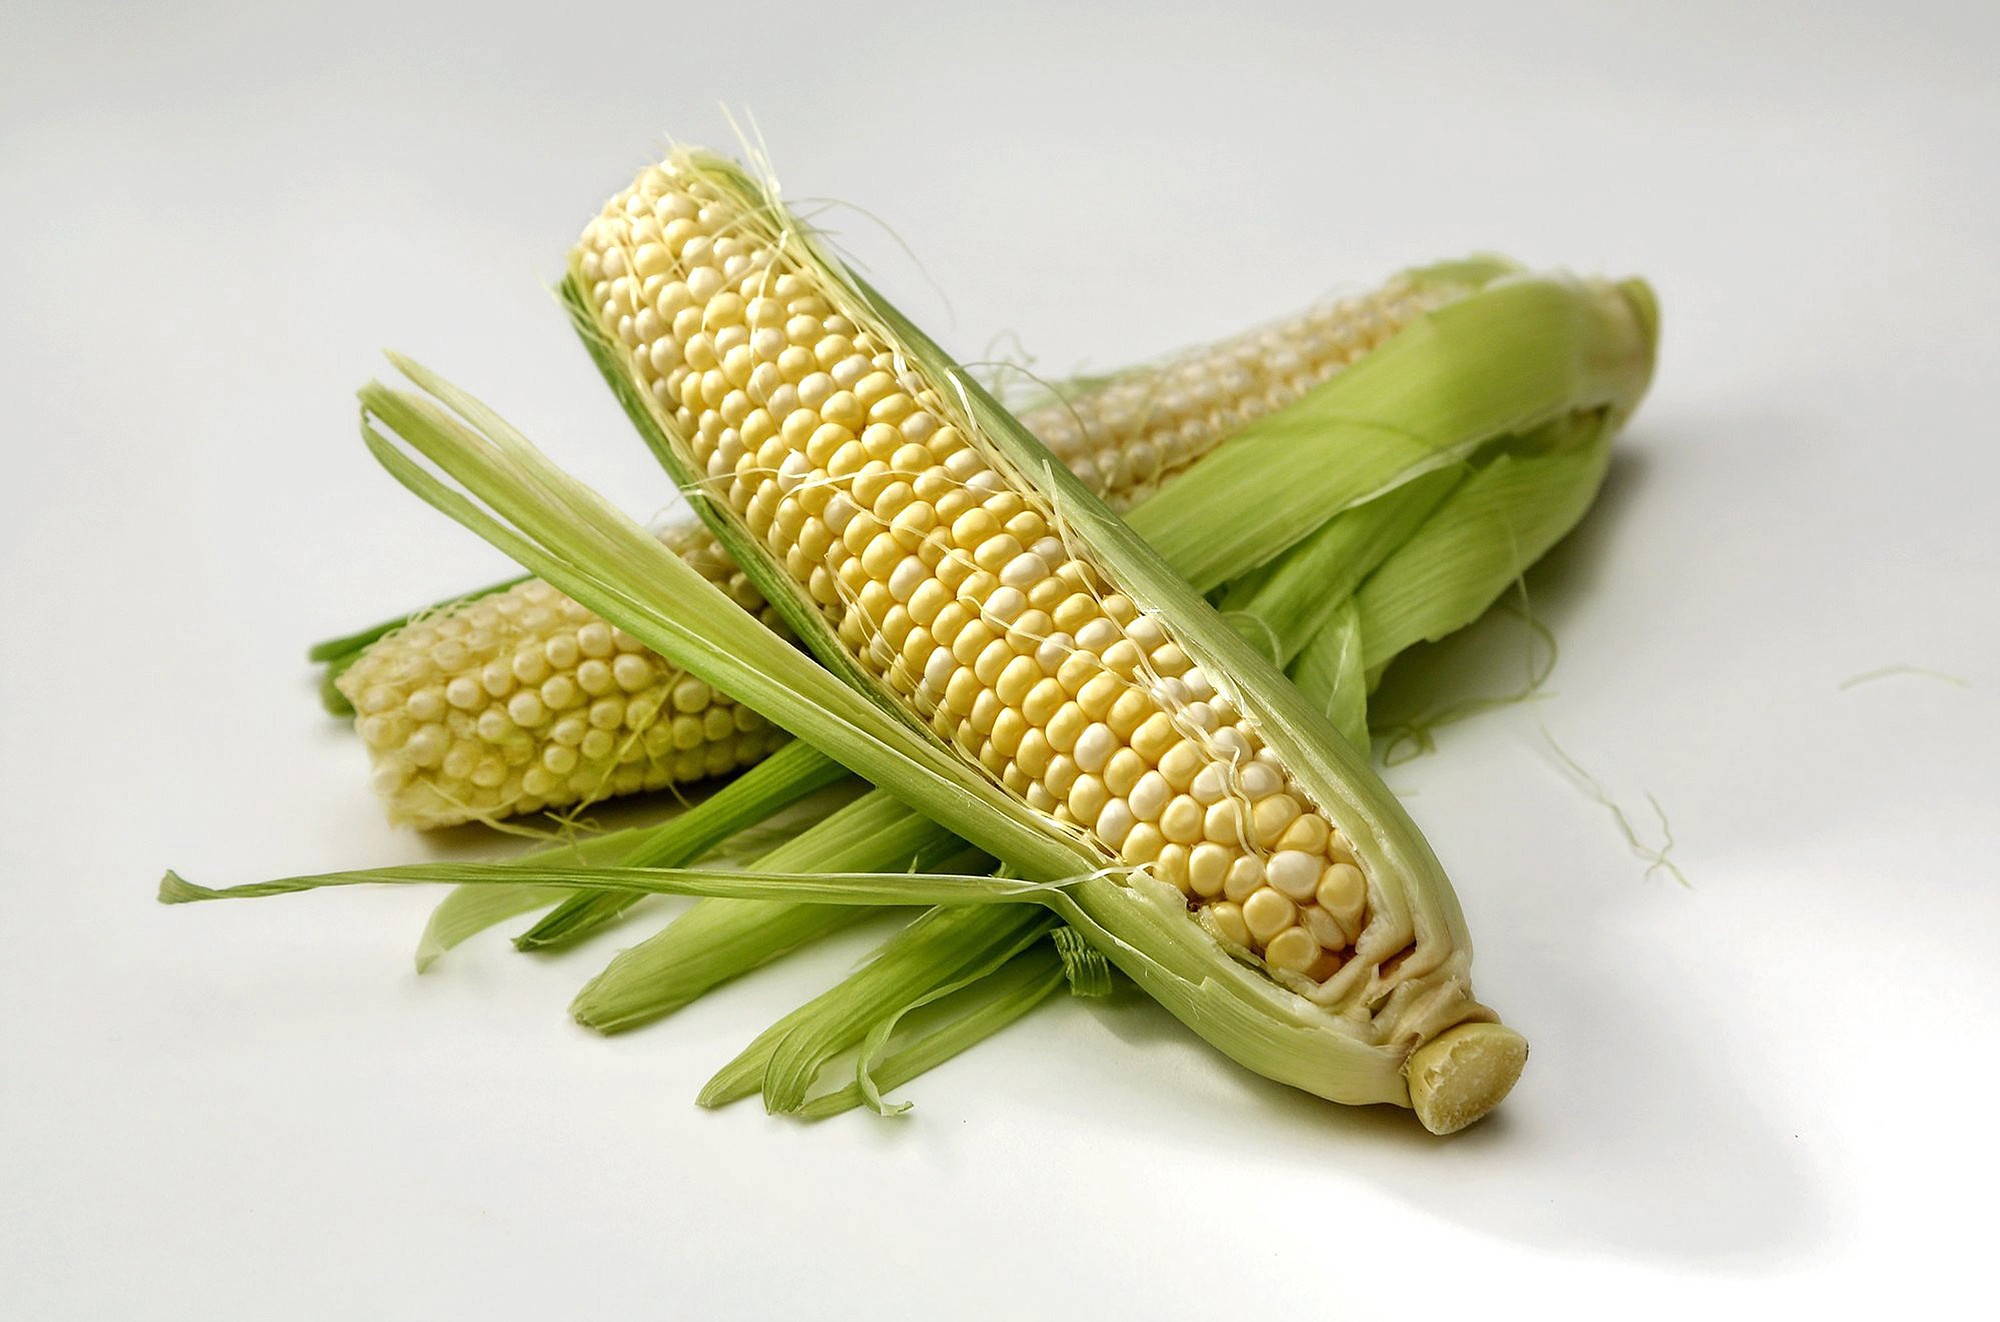 There are many creative ways to serve the seasonal bounty of corn, pictured, tomatoes, zucchini, eggplant and peppers for the family to enjoy.